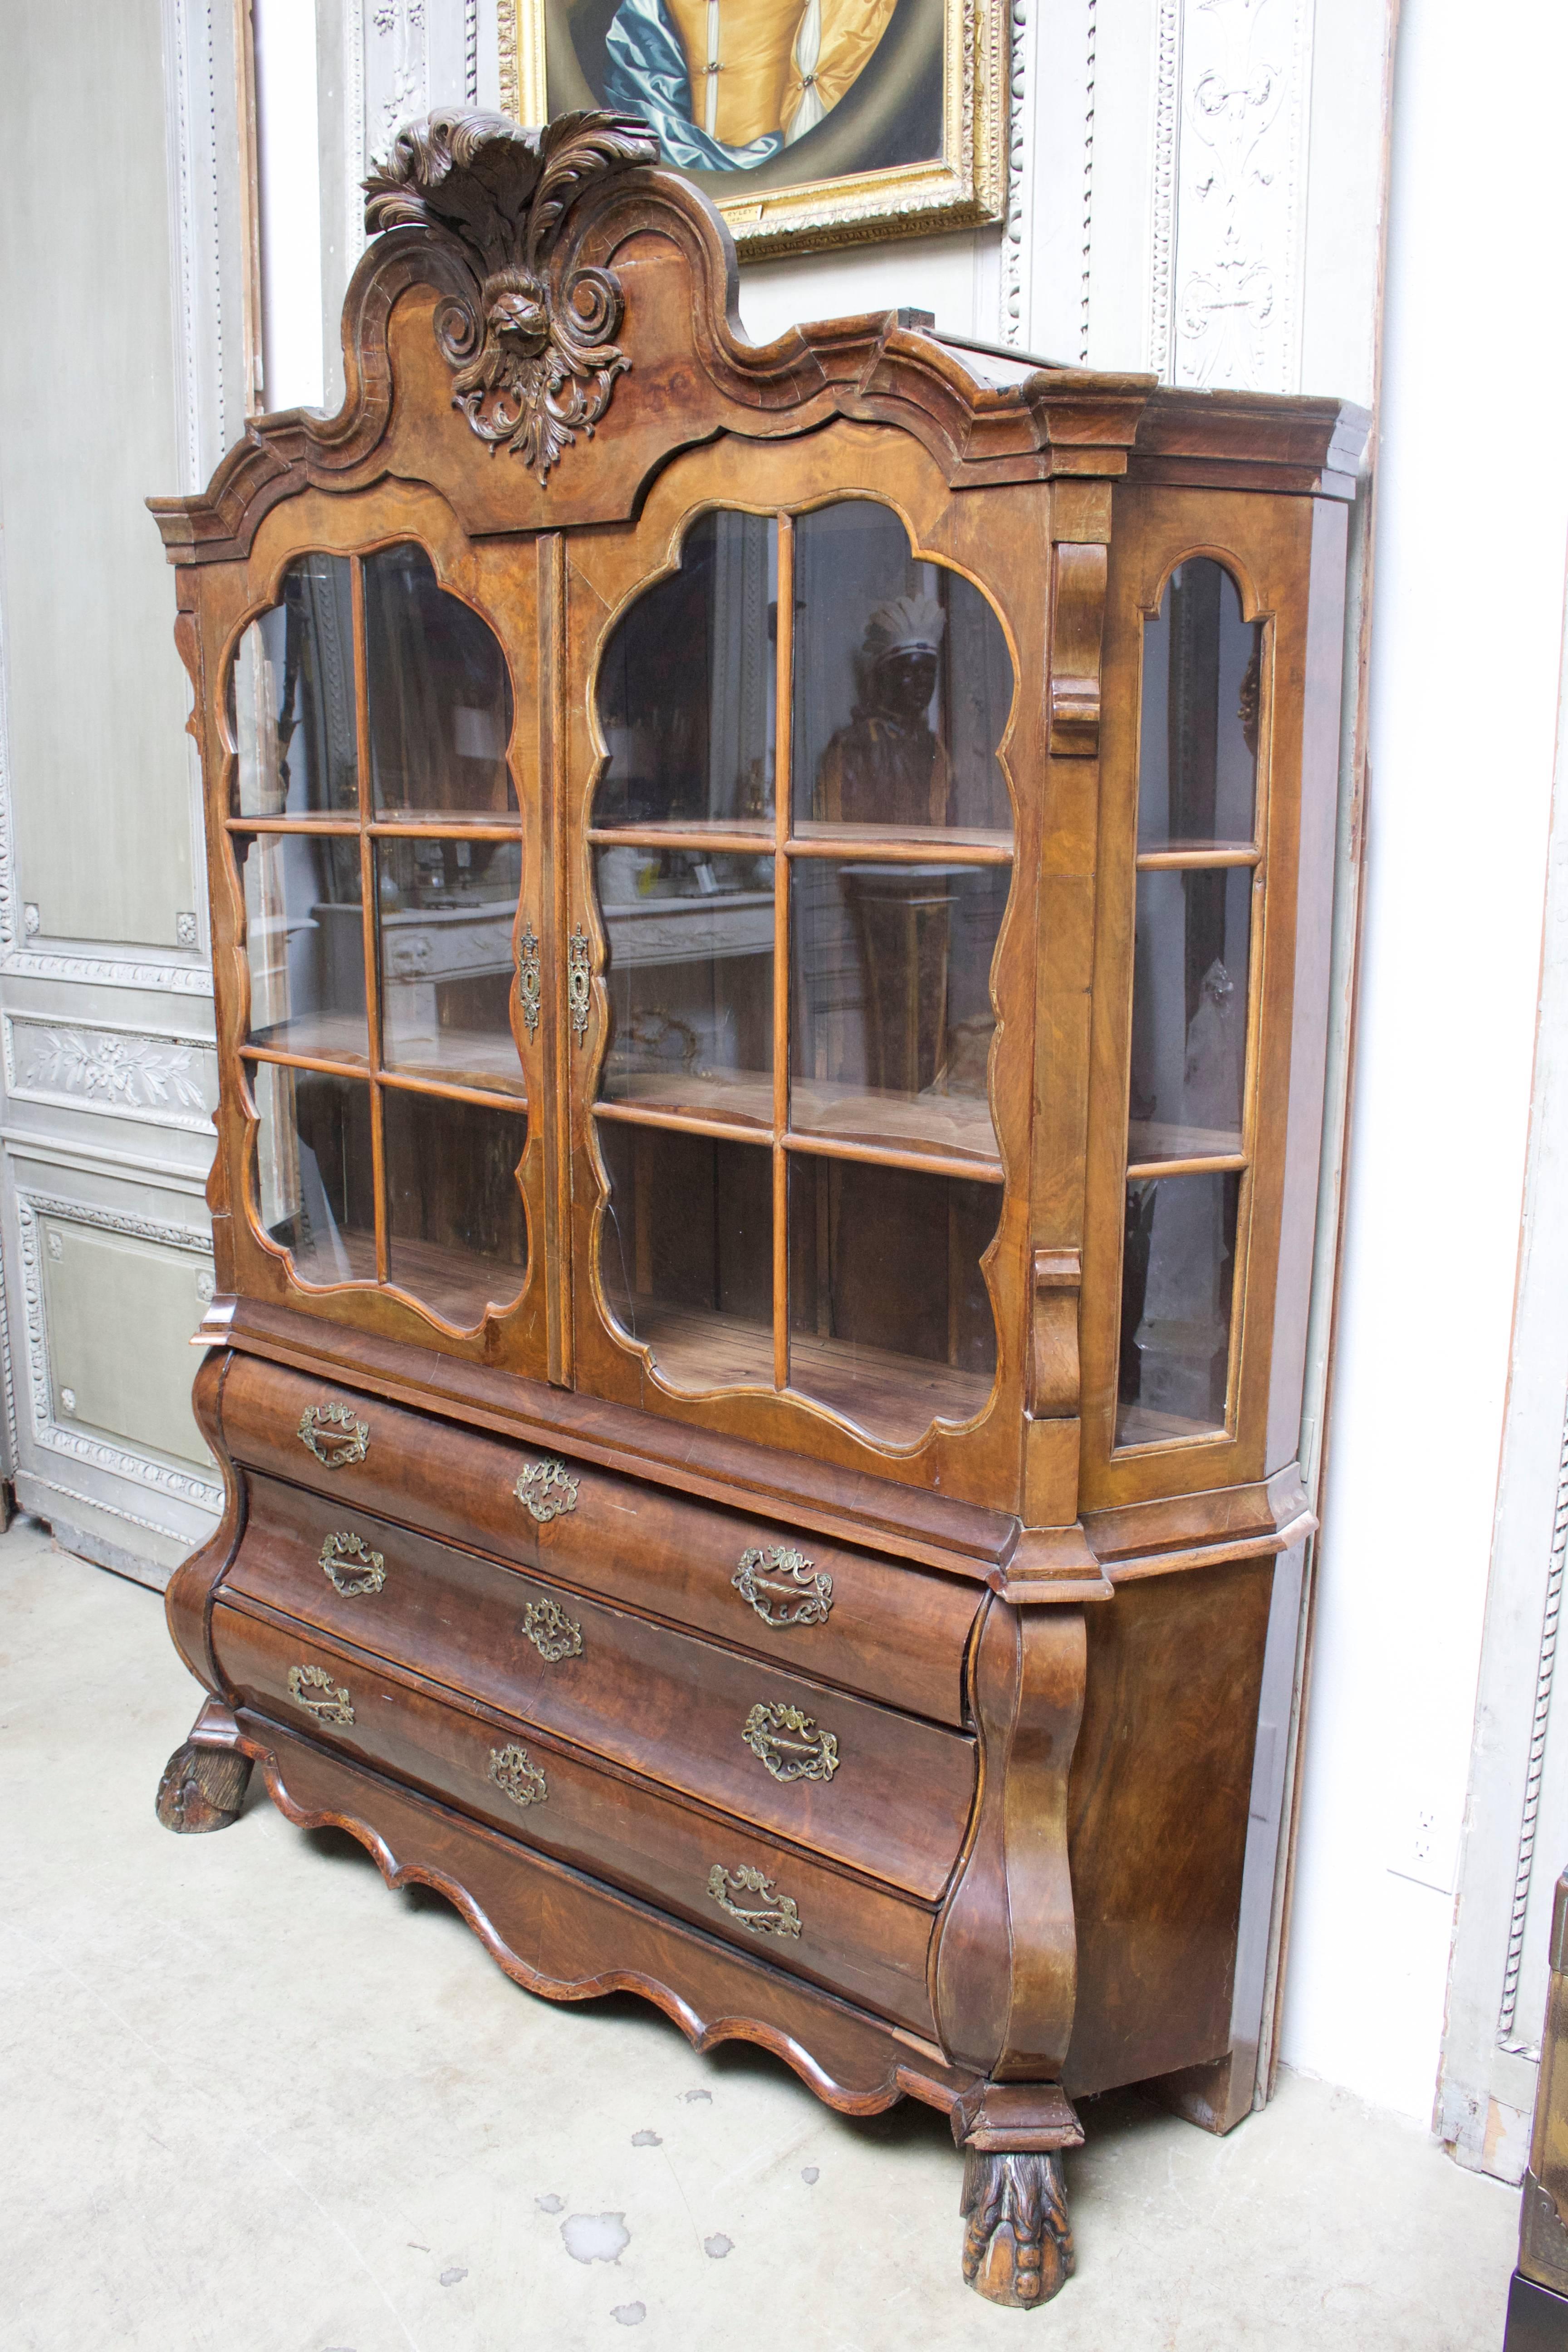 Dutch Rococo style burled walnut cabinet from the 19th century with nice carving and patina. This display cabinet with glass doors and sides rest upon a three drawer bombe chest.